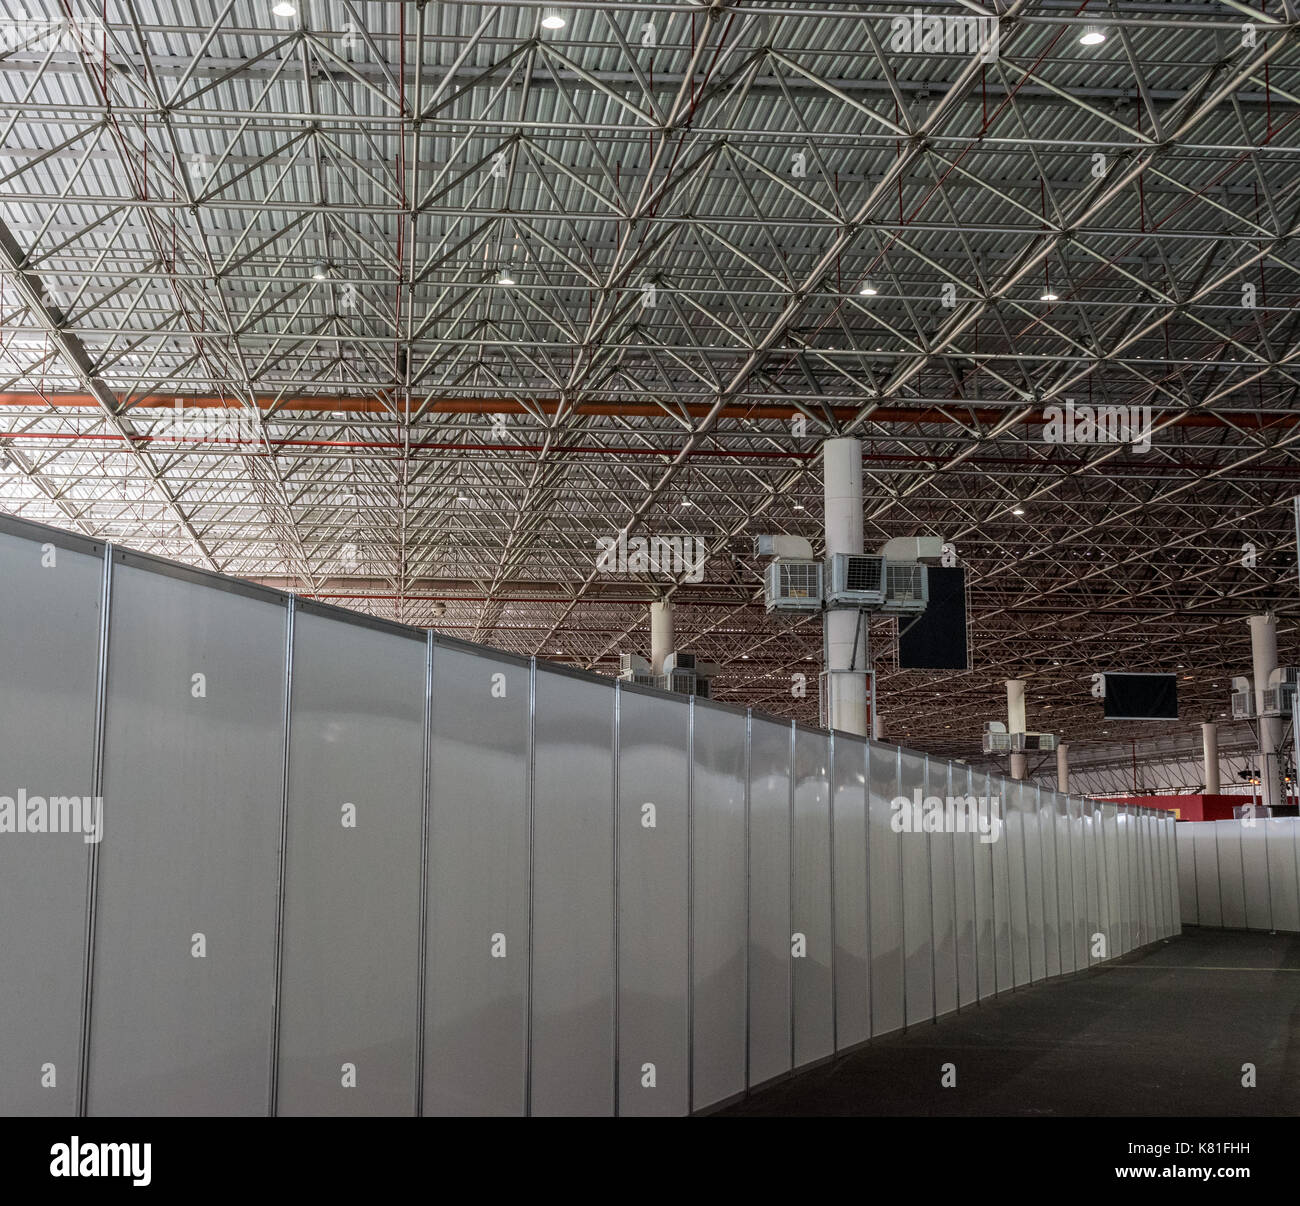 Shed / Hangar interior, with steel beams and support and overhead light, dry wall path and air conditioning units in the background Stock Photo